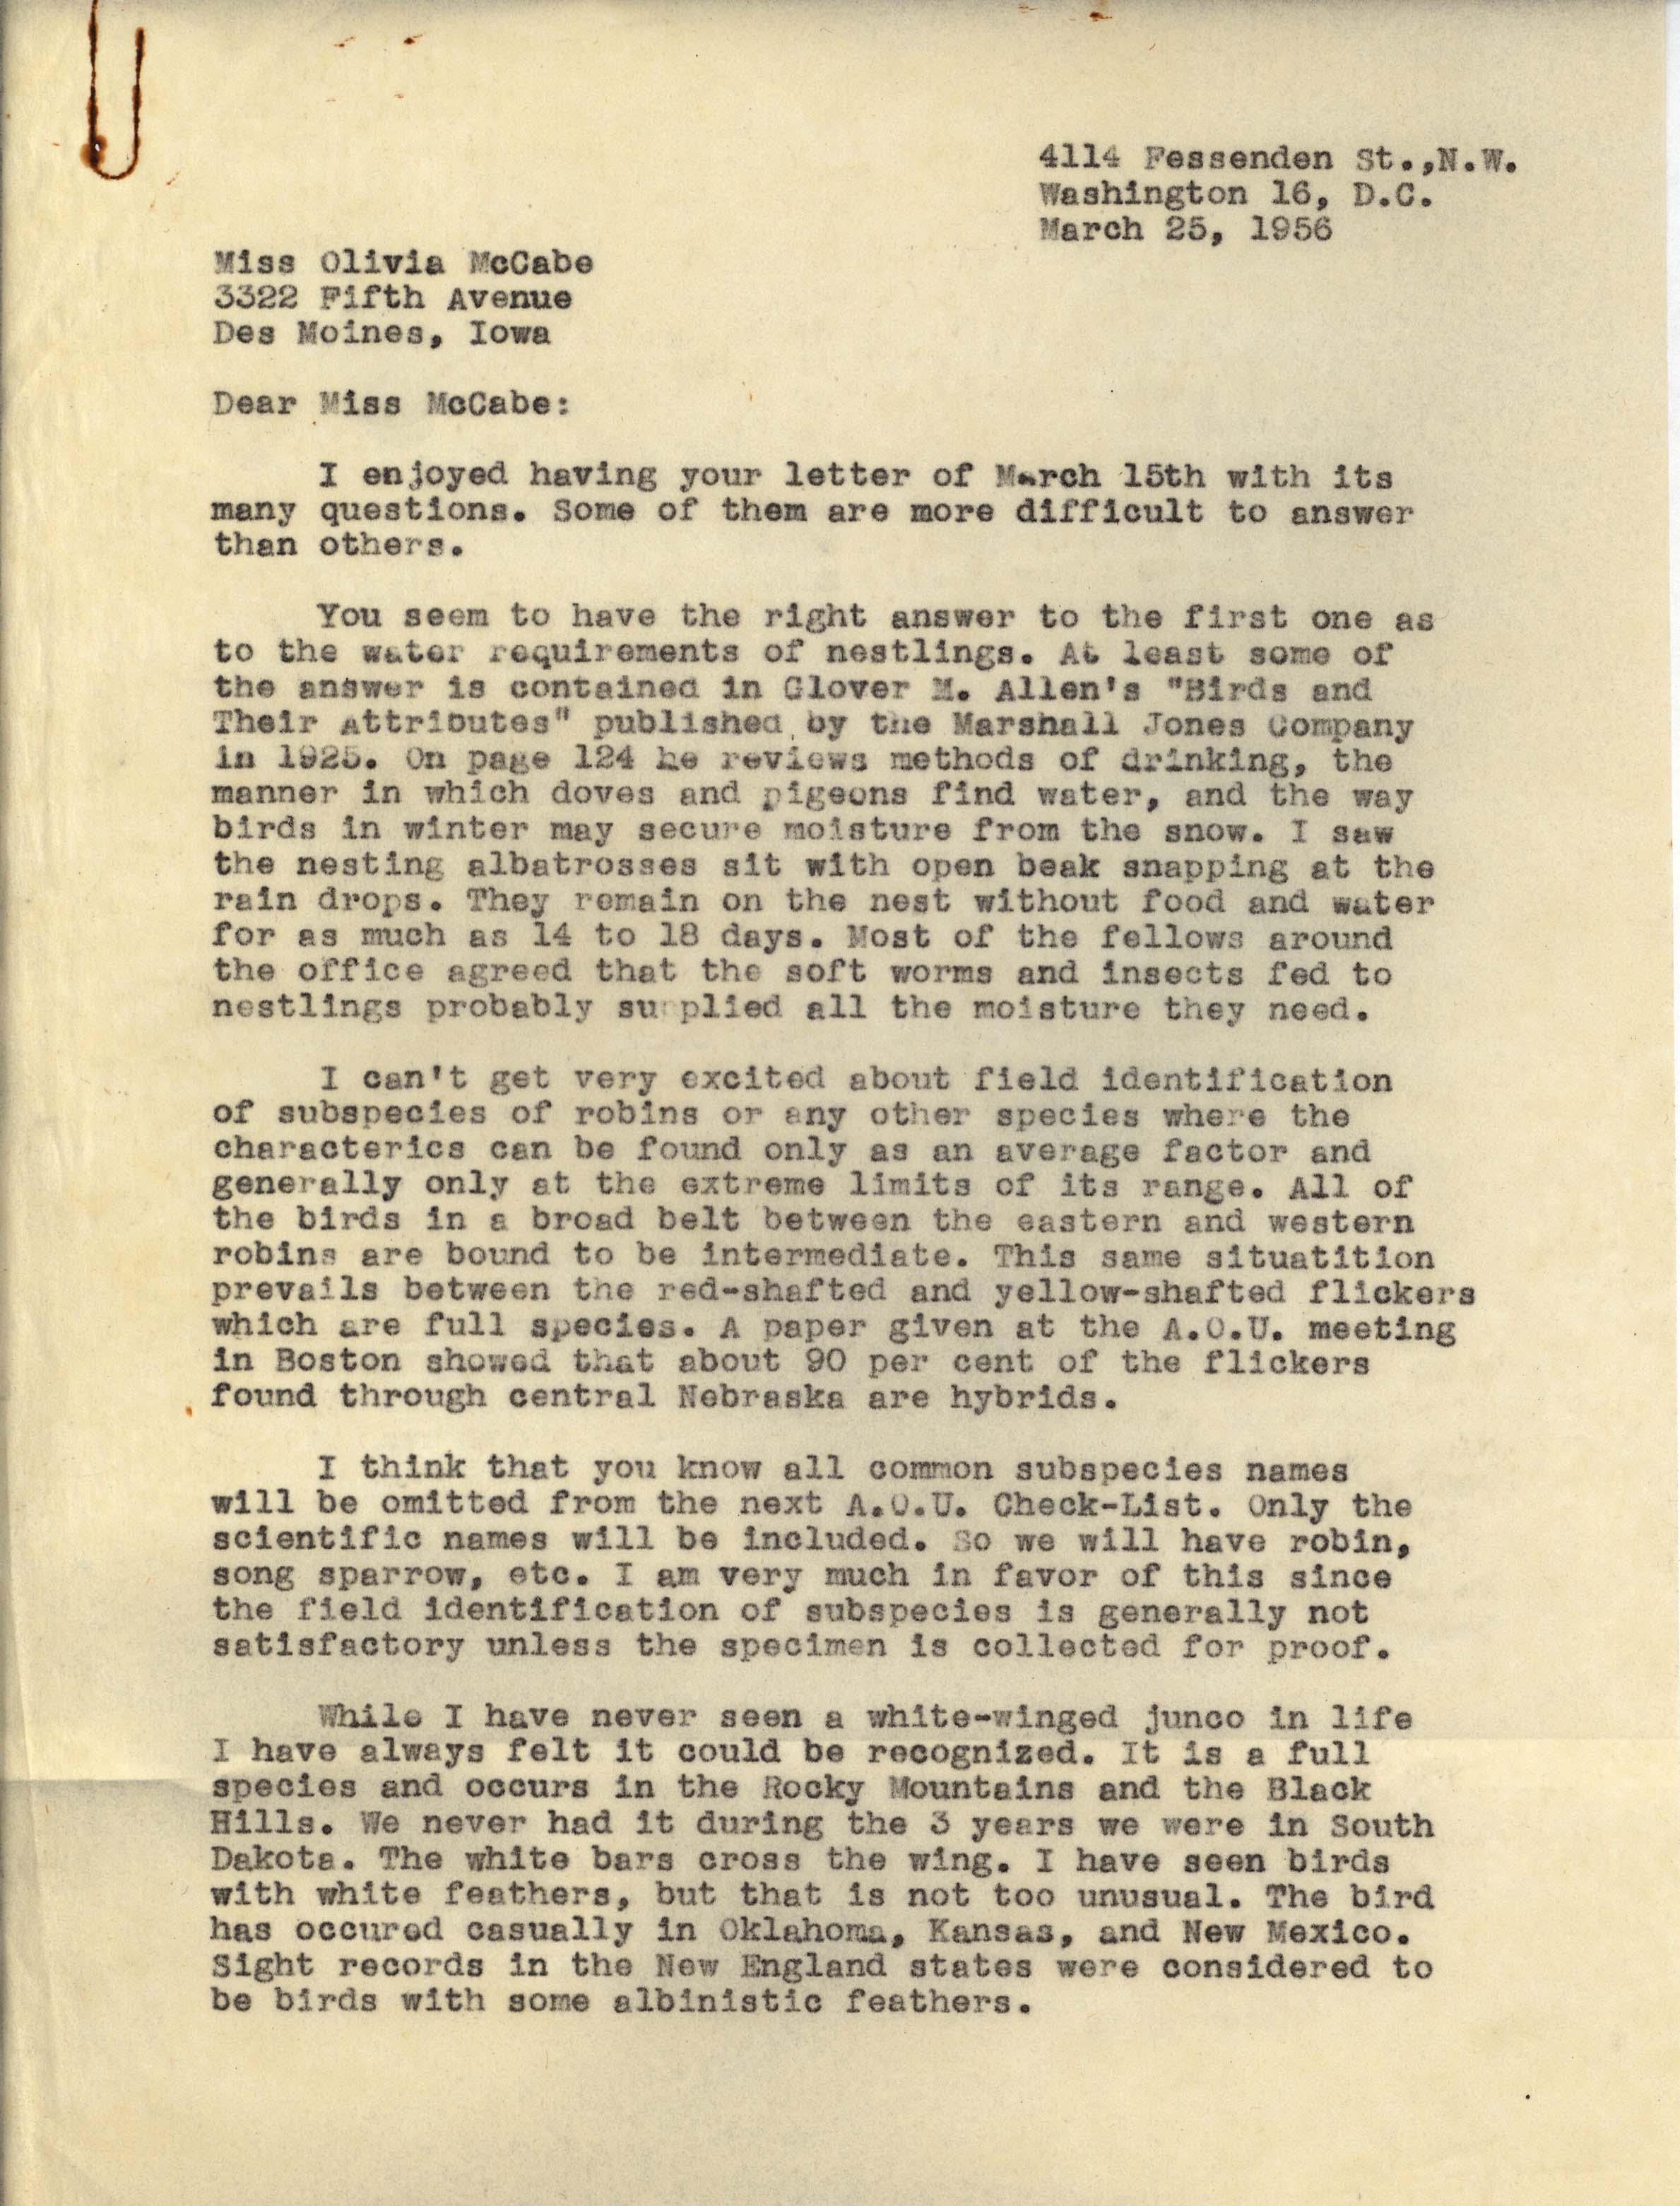 Philip DuMont letter to Olivia McCabe regarding bird hydration and field identifications, March 25, 1956